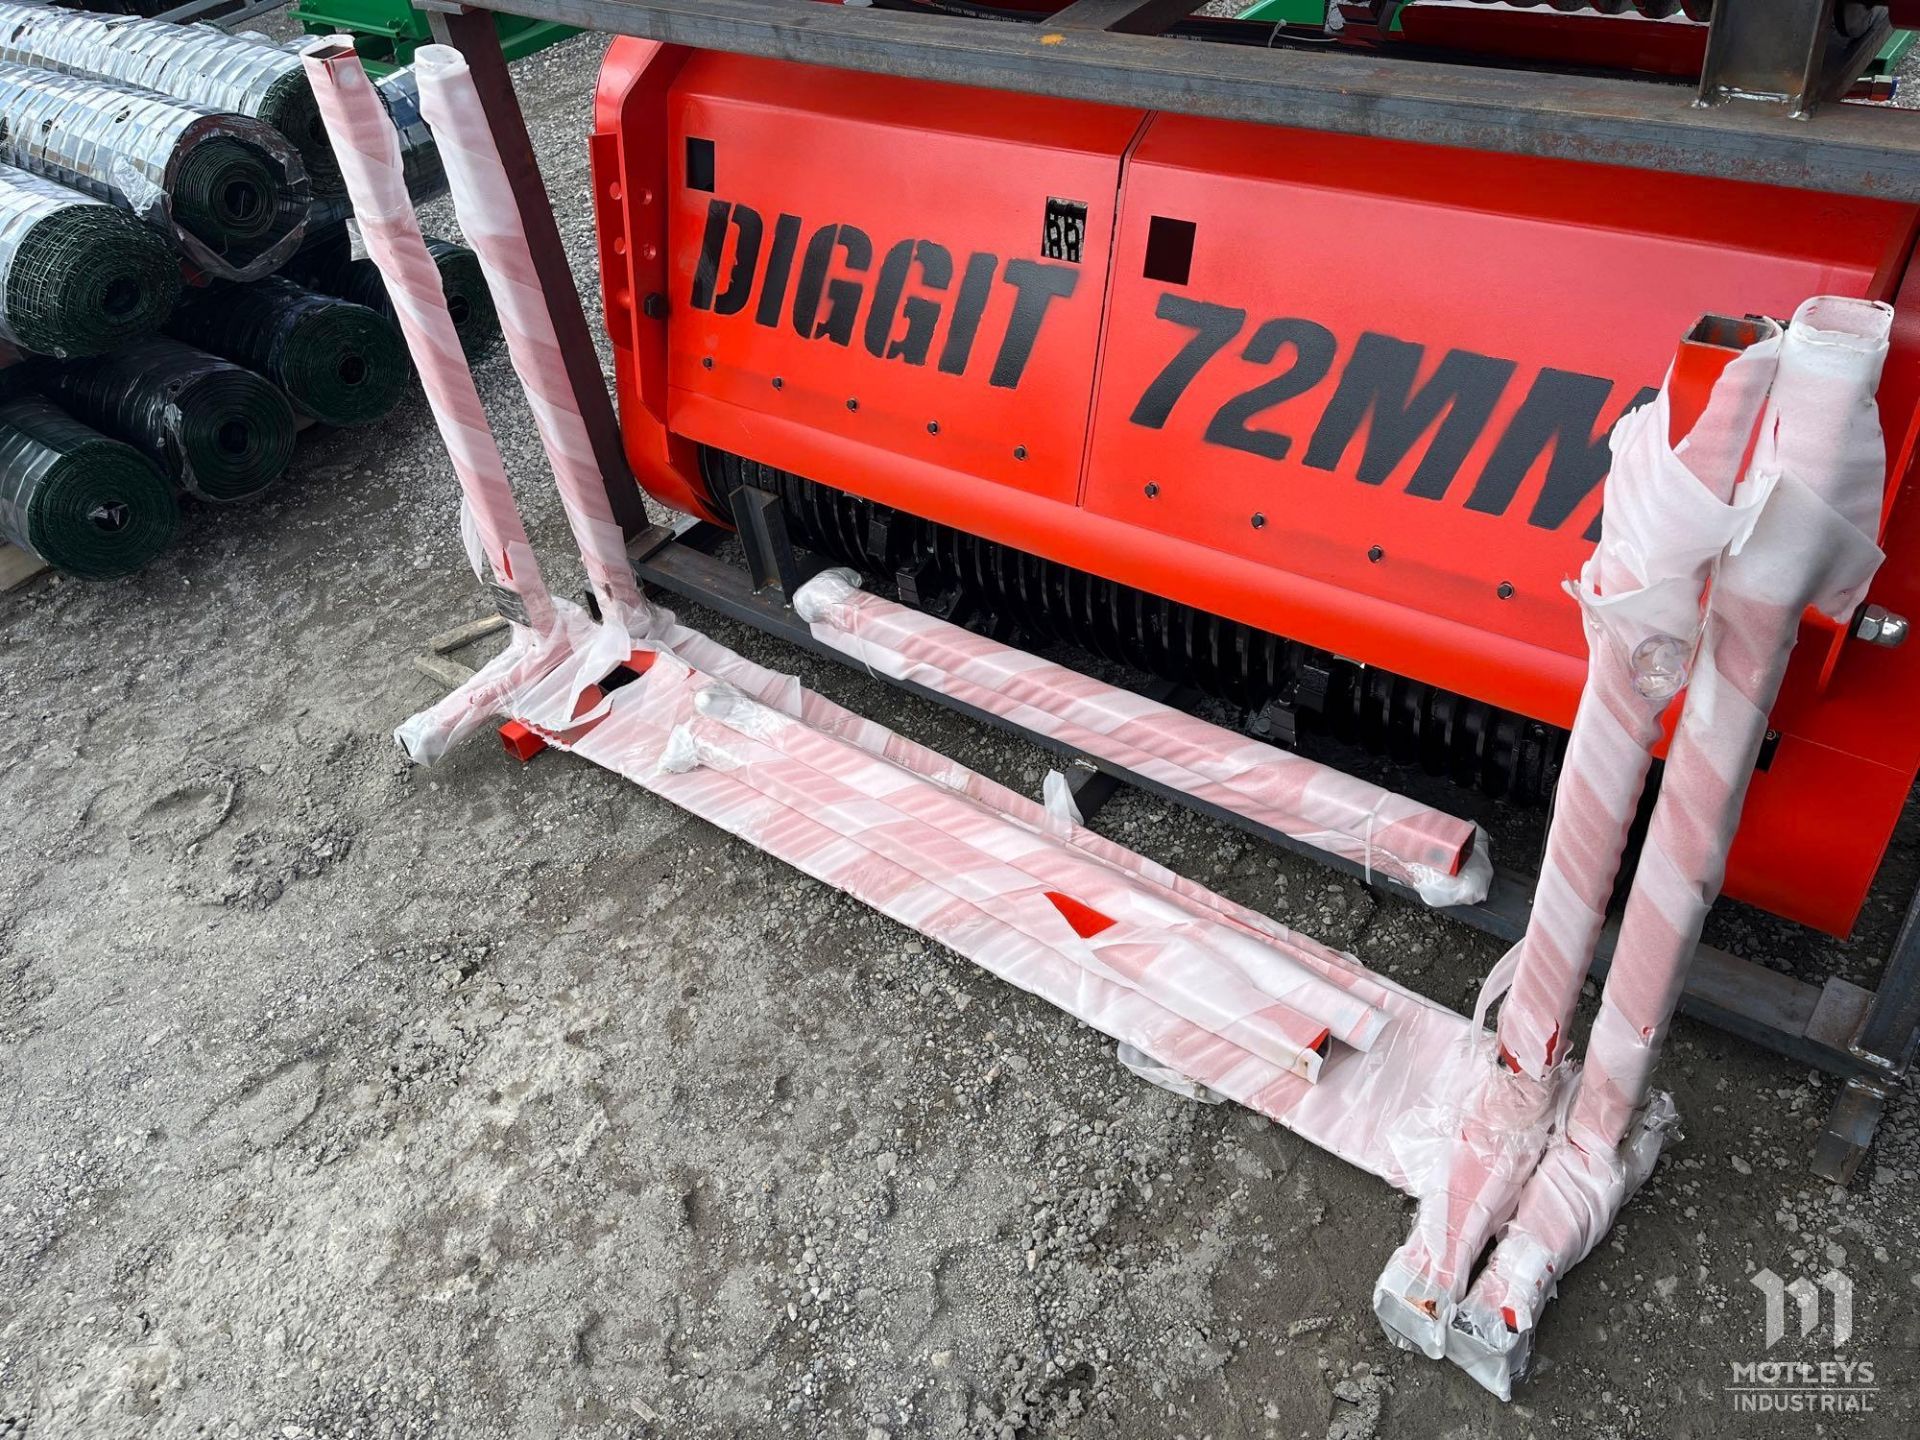 DIGGIT TH76 Forestry Mulcher - Image 7 of 7